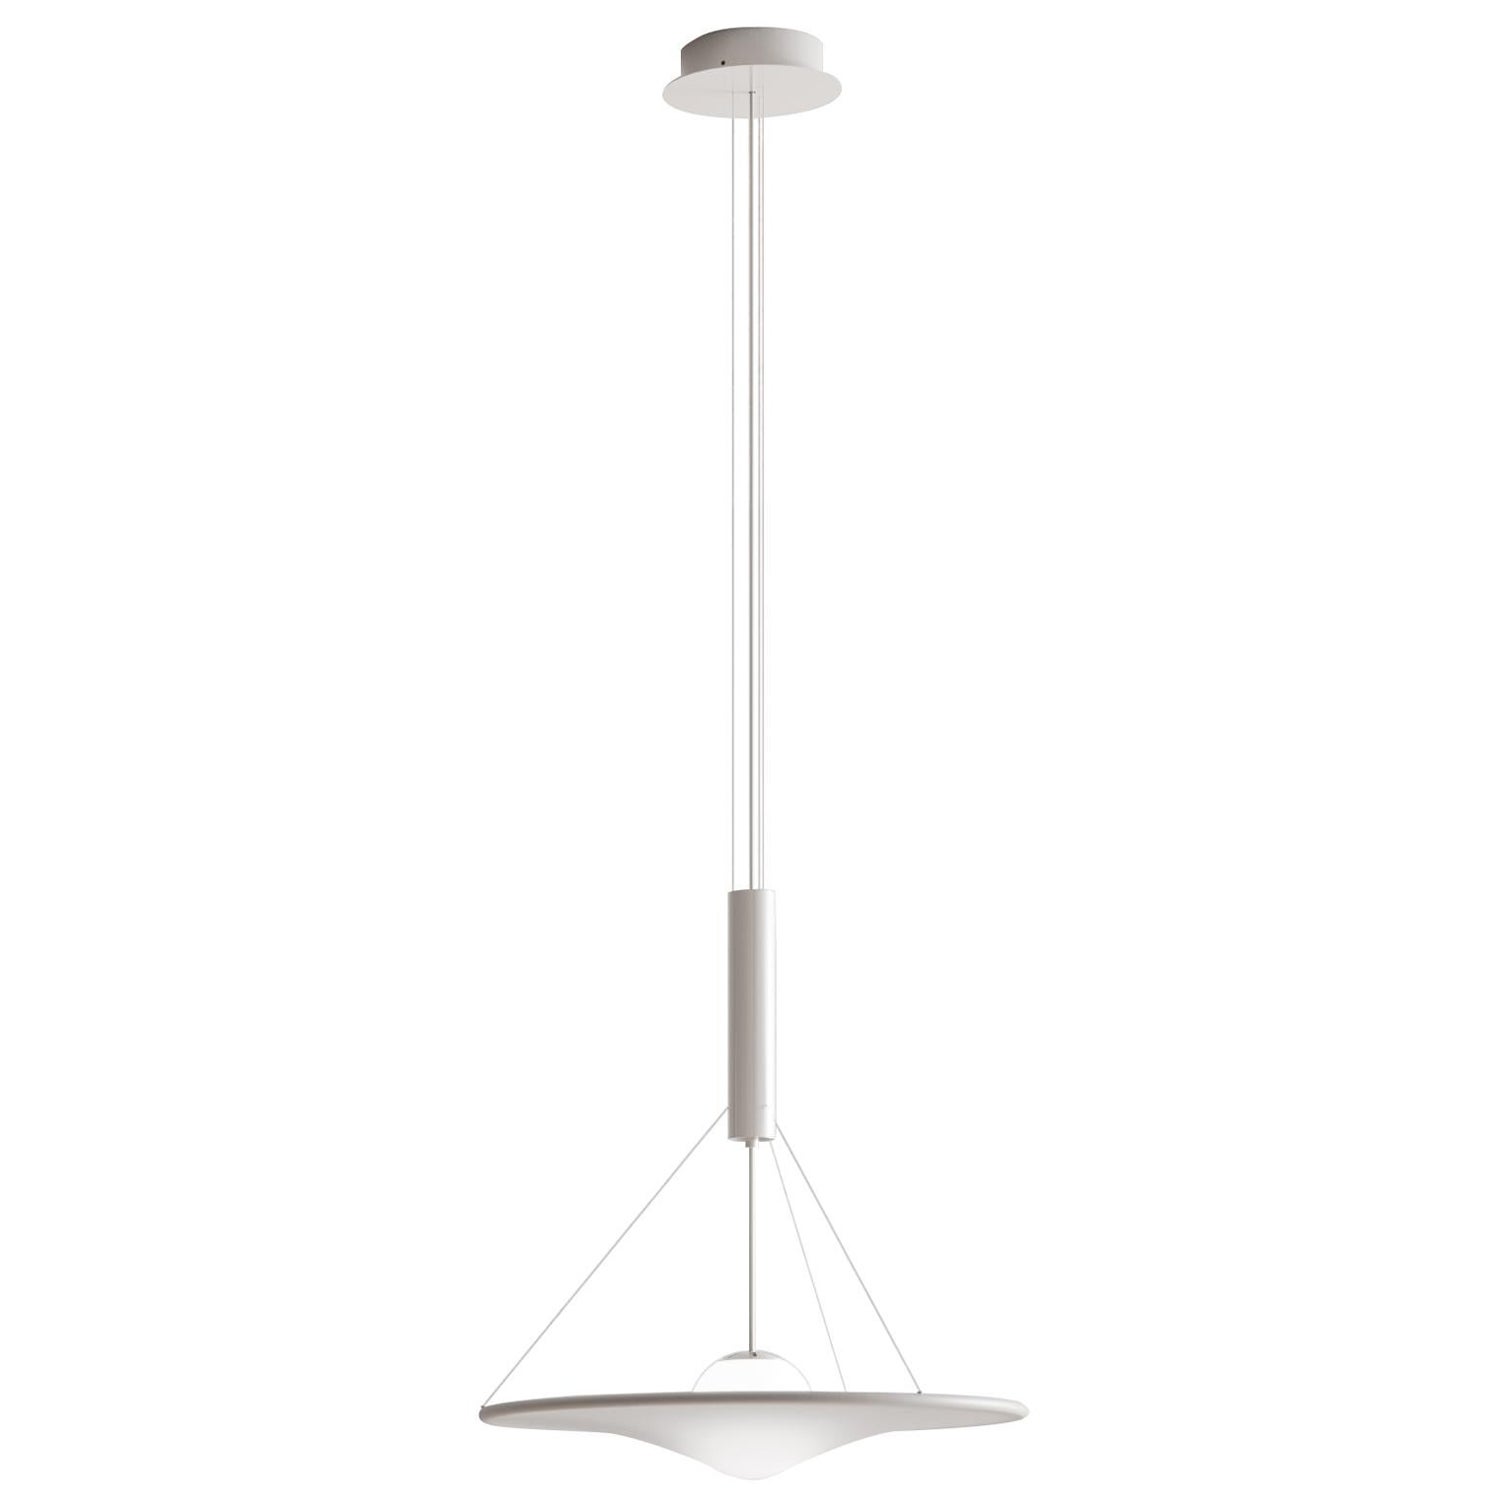 Axolight Manto Extra Large Pendant Light in White Fabric and Grey Finish